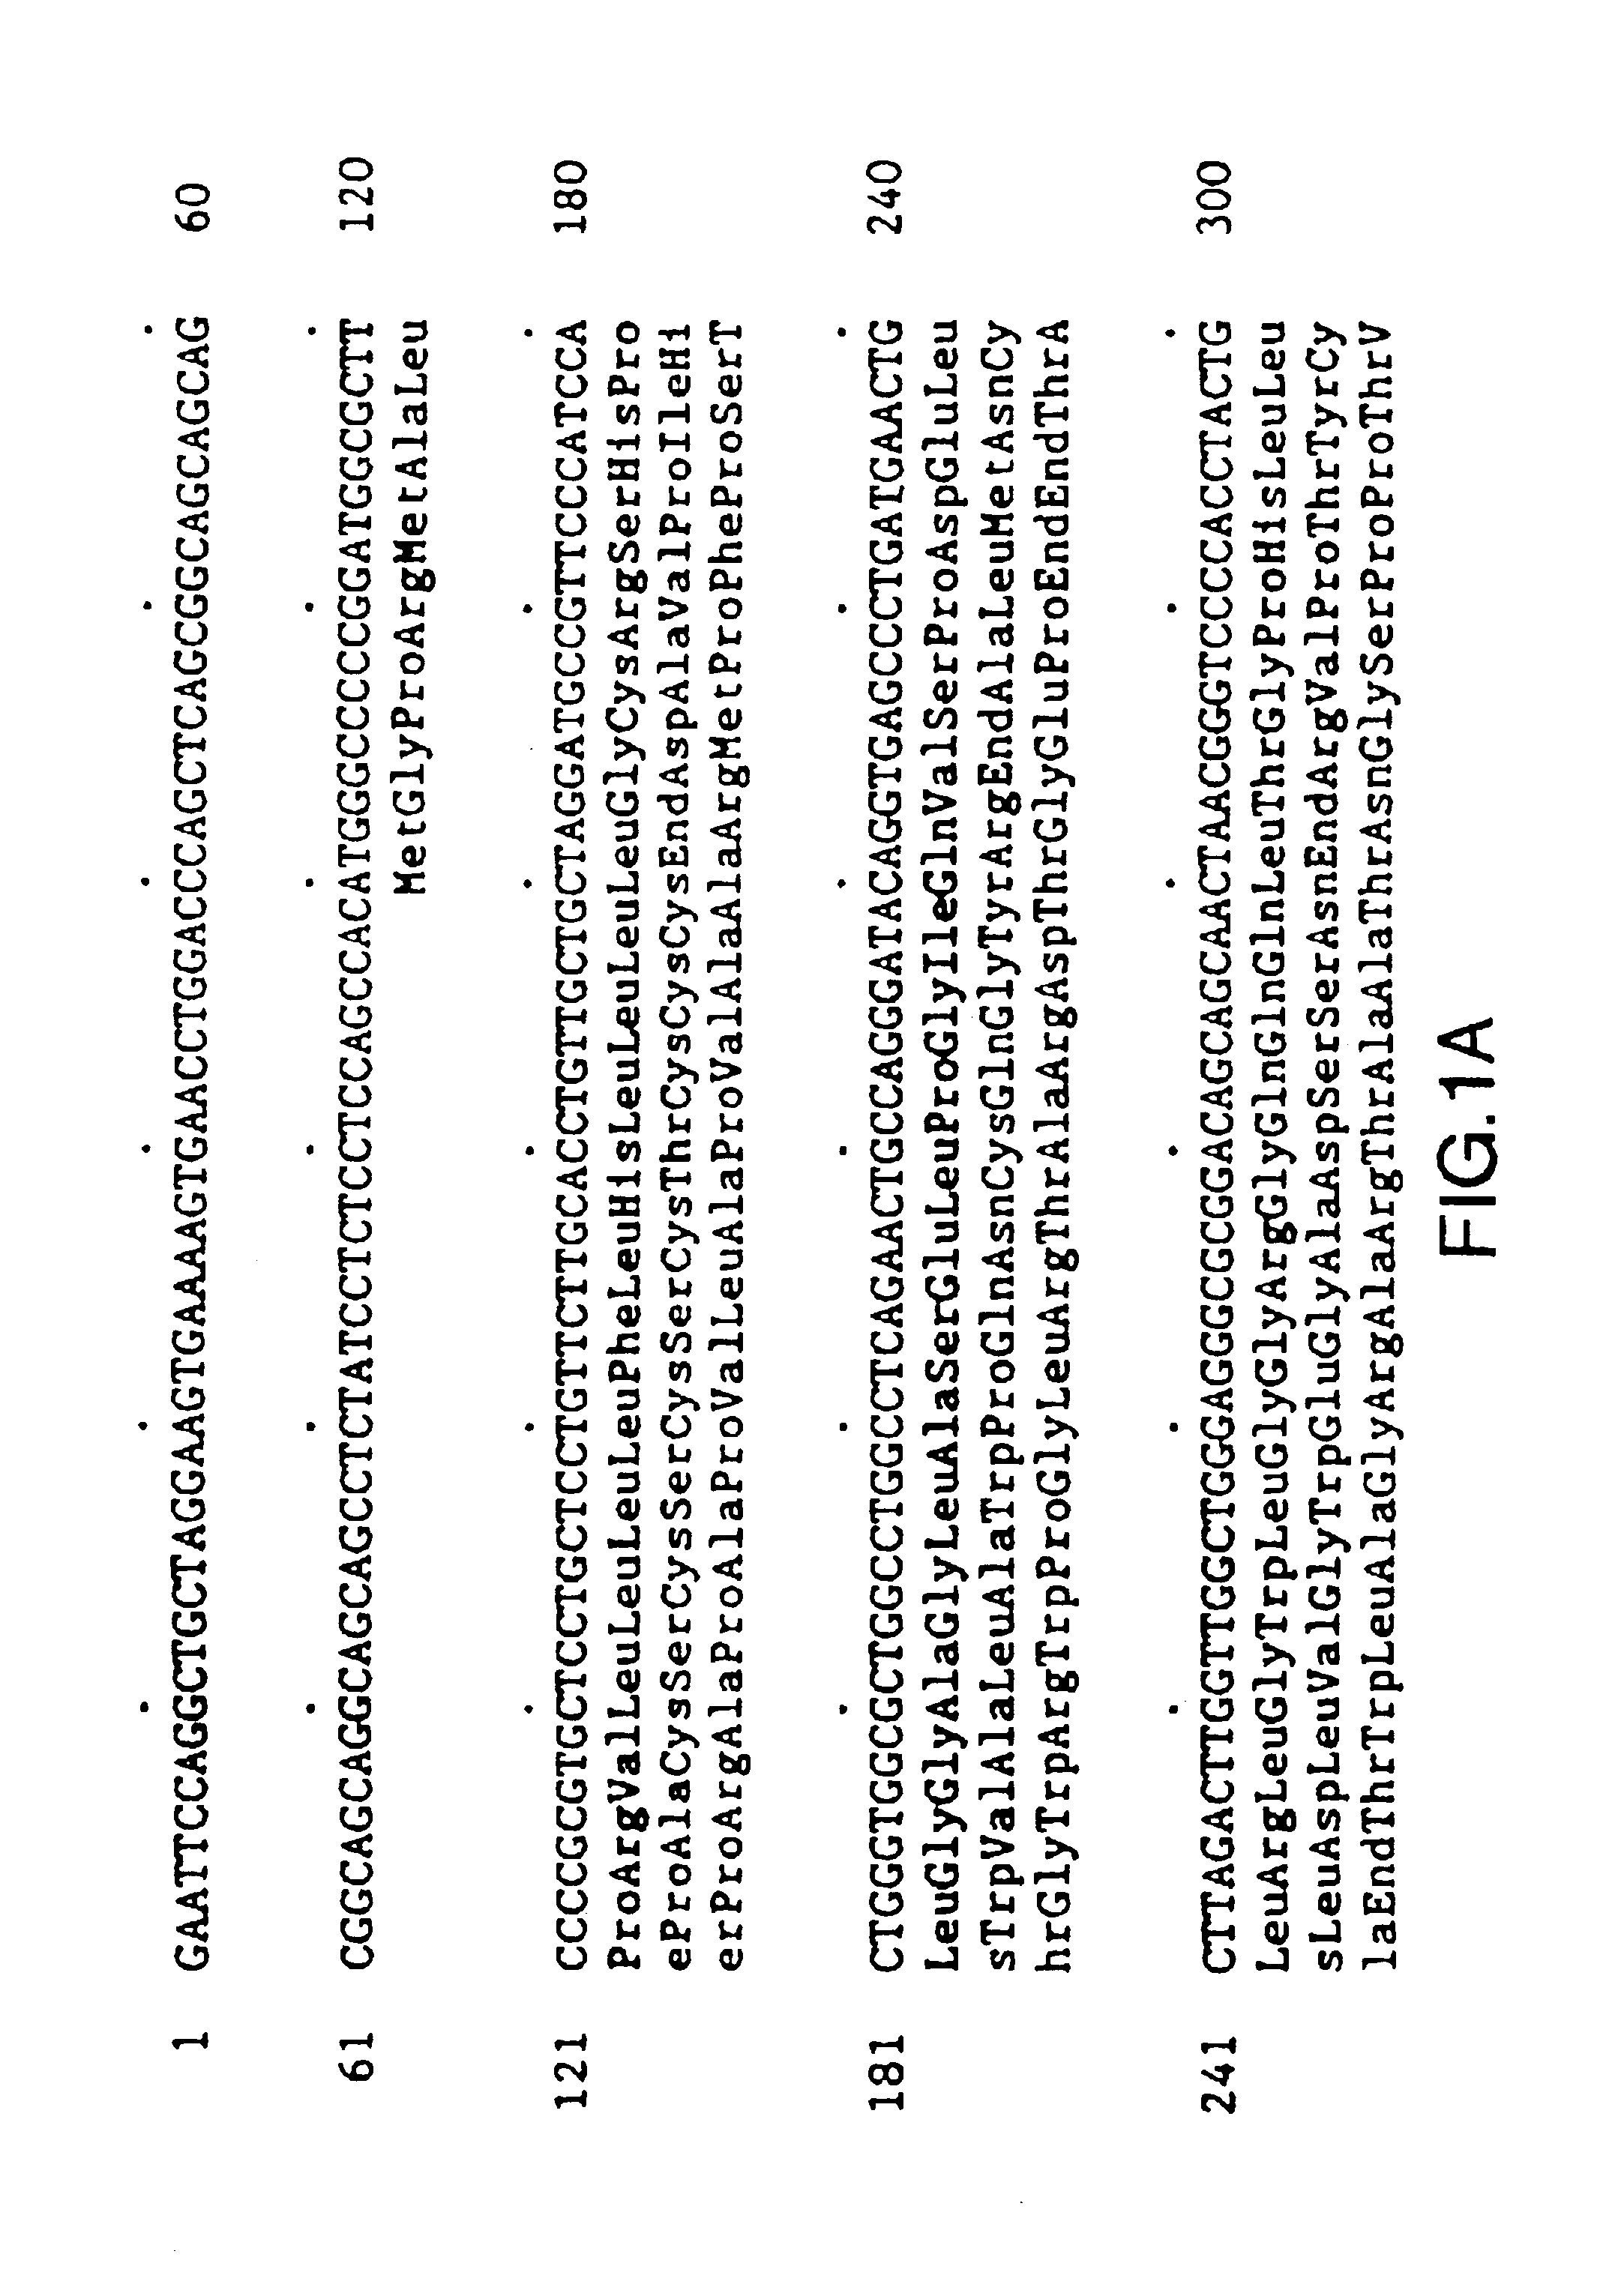 Pharmaceutical compositions and methods using natriuretic peptides